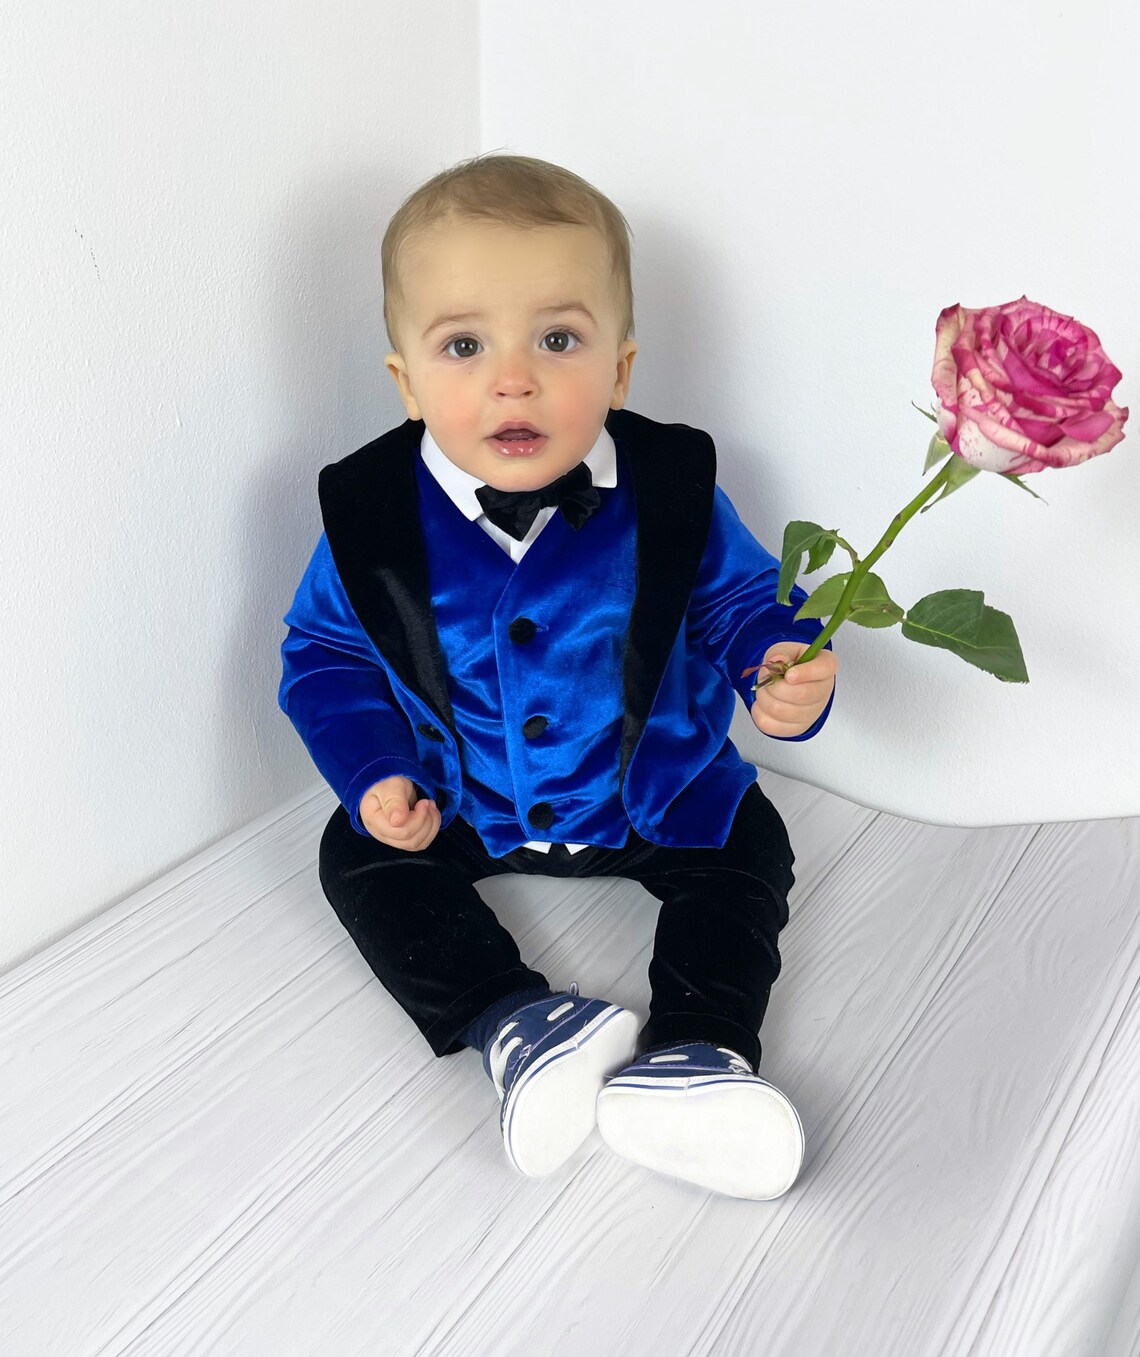 A toddler in a blue tuxedo extends a pink rose toward the screen. He looks very handsome and excited to party at baby prom!